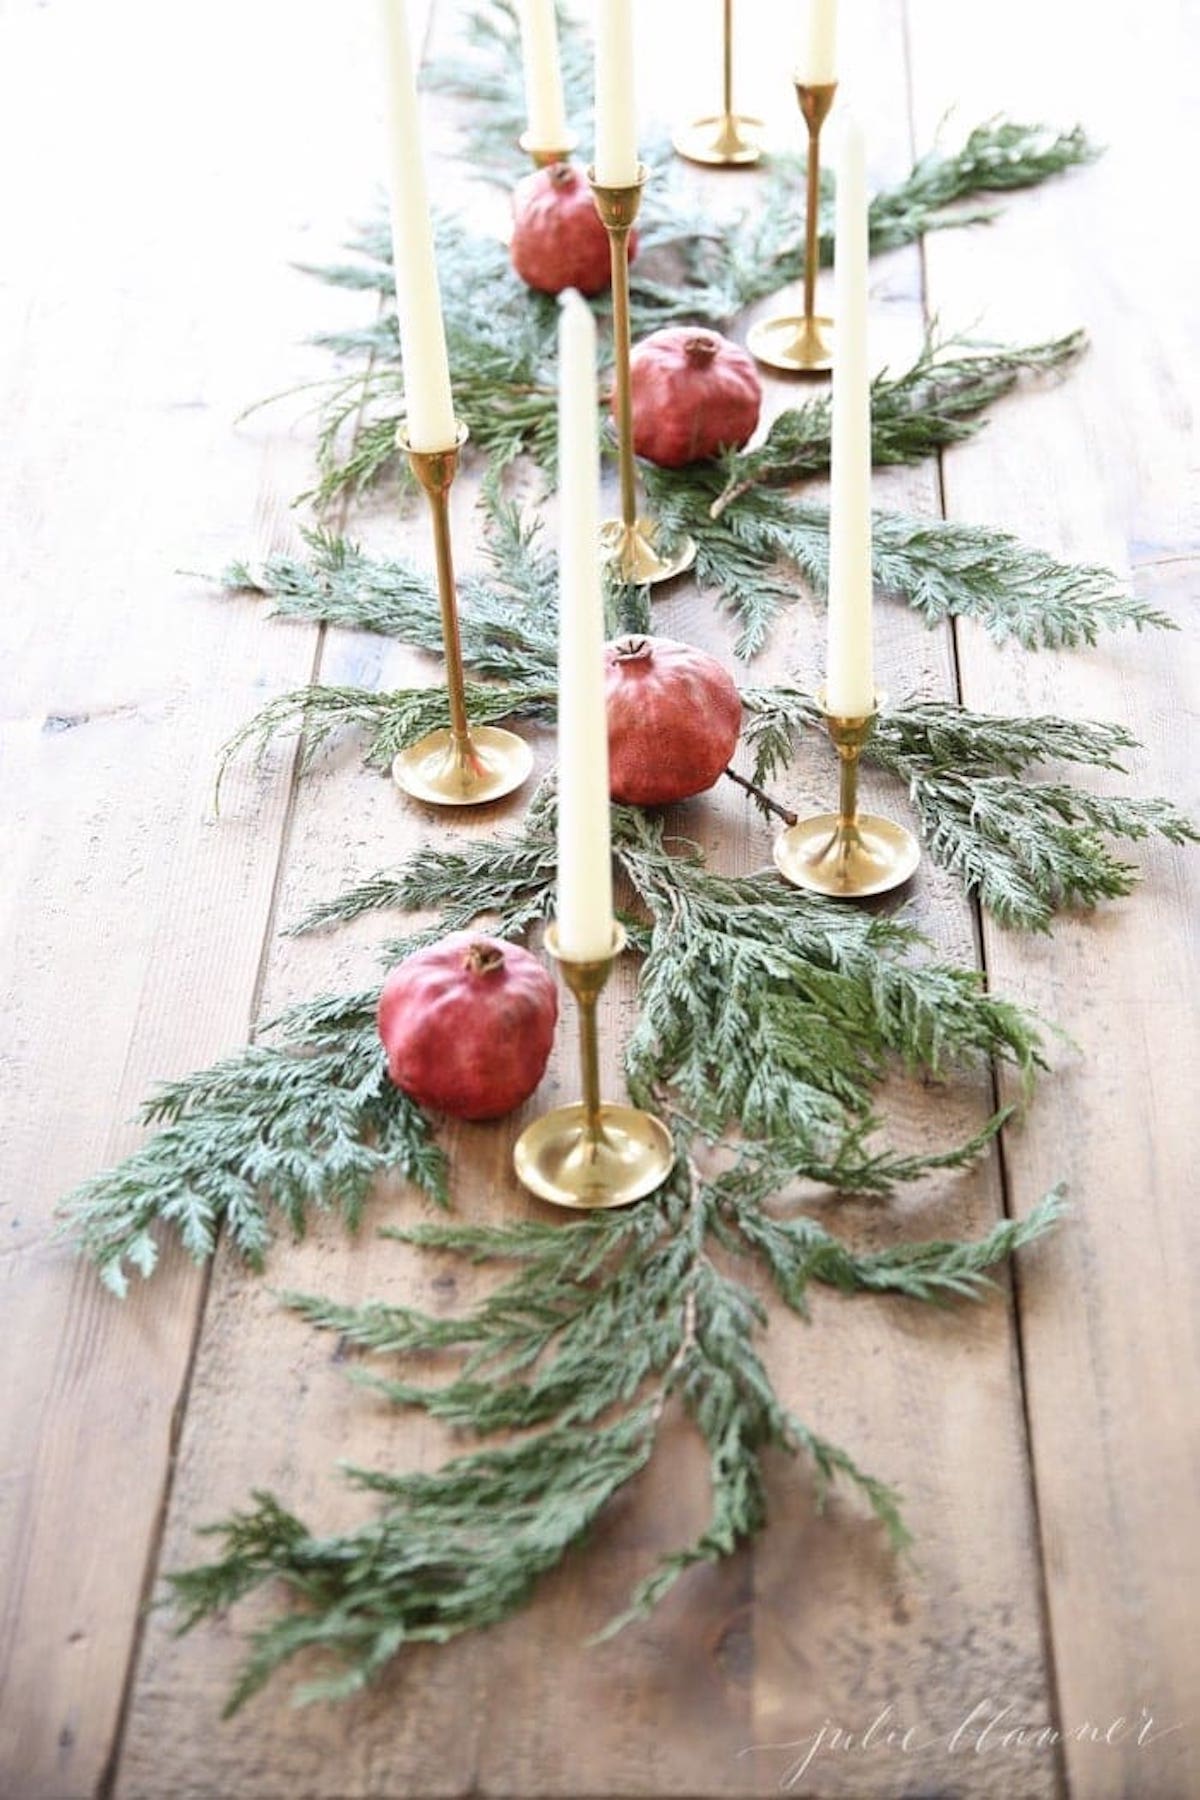 A festive Christmas table runner adorned with pomegranates and greenery, perfect as a holiday candle centerpiece.